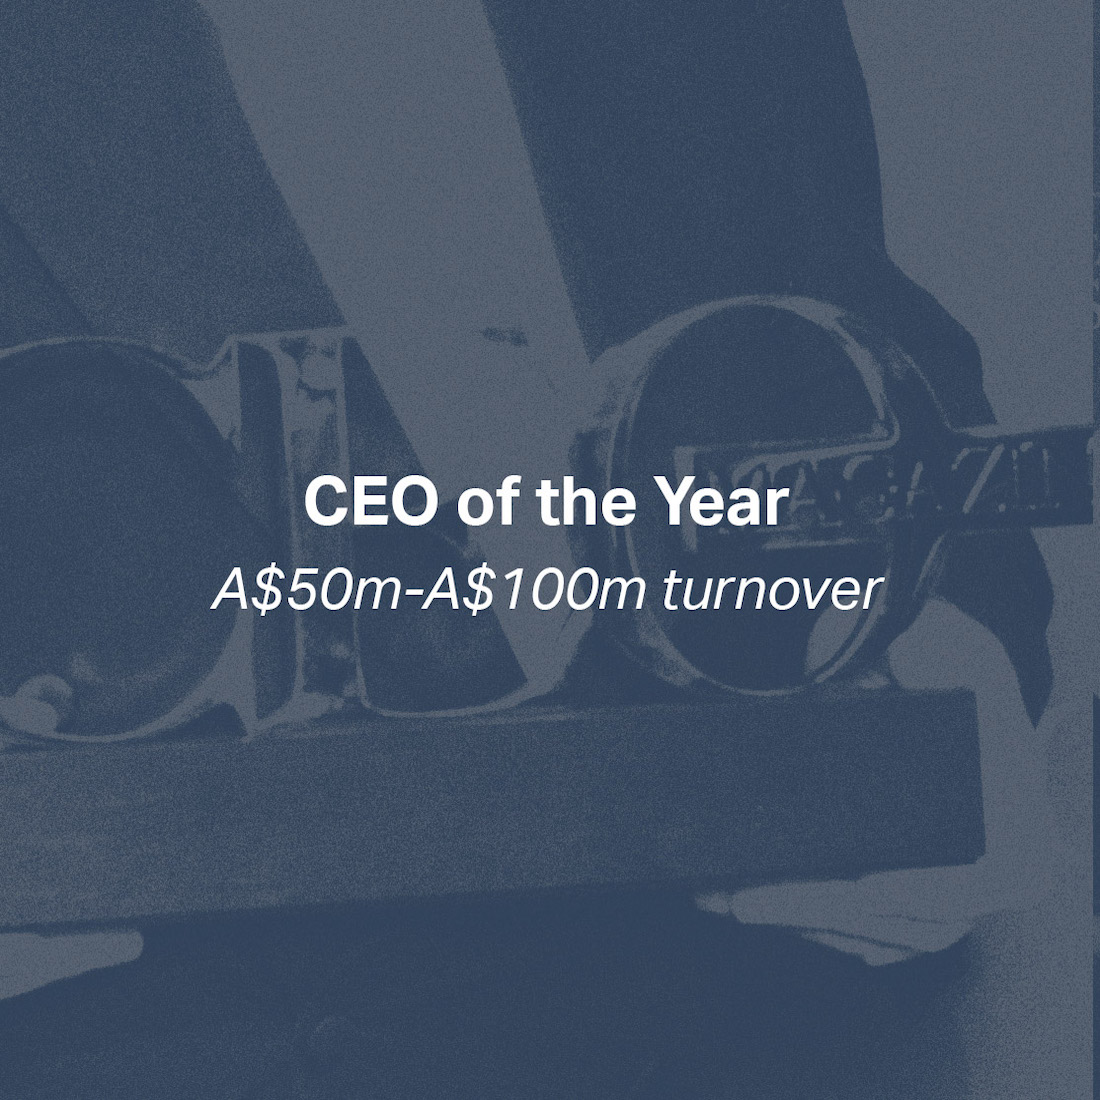 CEO of the Year - A$50m-A$100m turnover